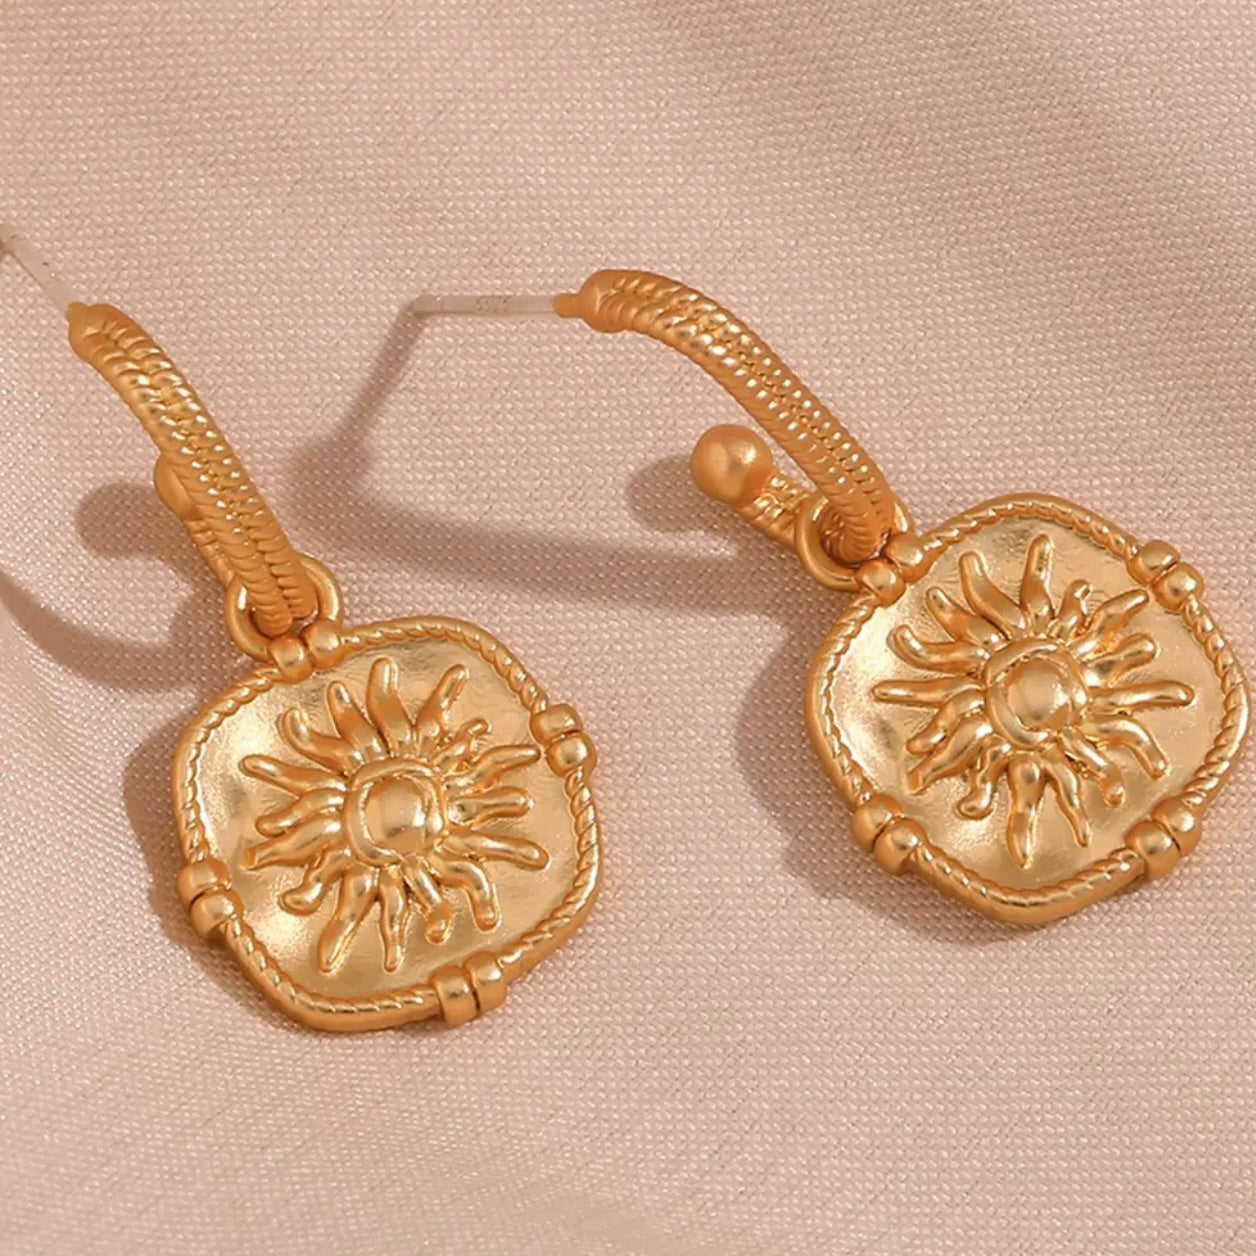 Vintage style Sun Drop Earring - 18k Gold Plated